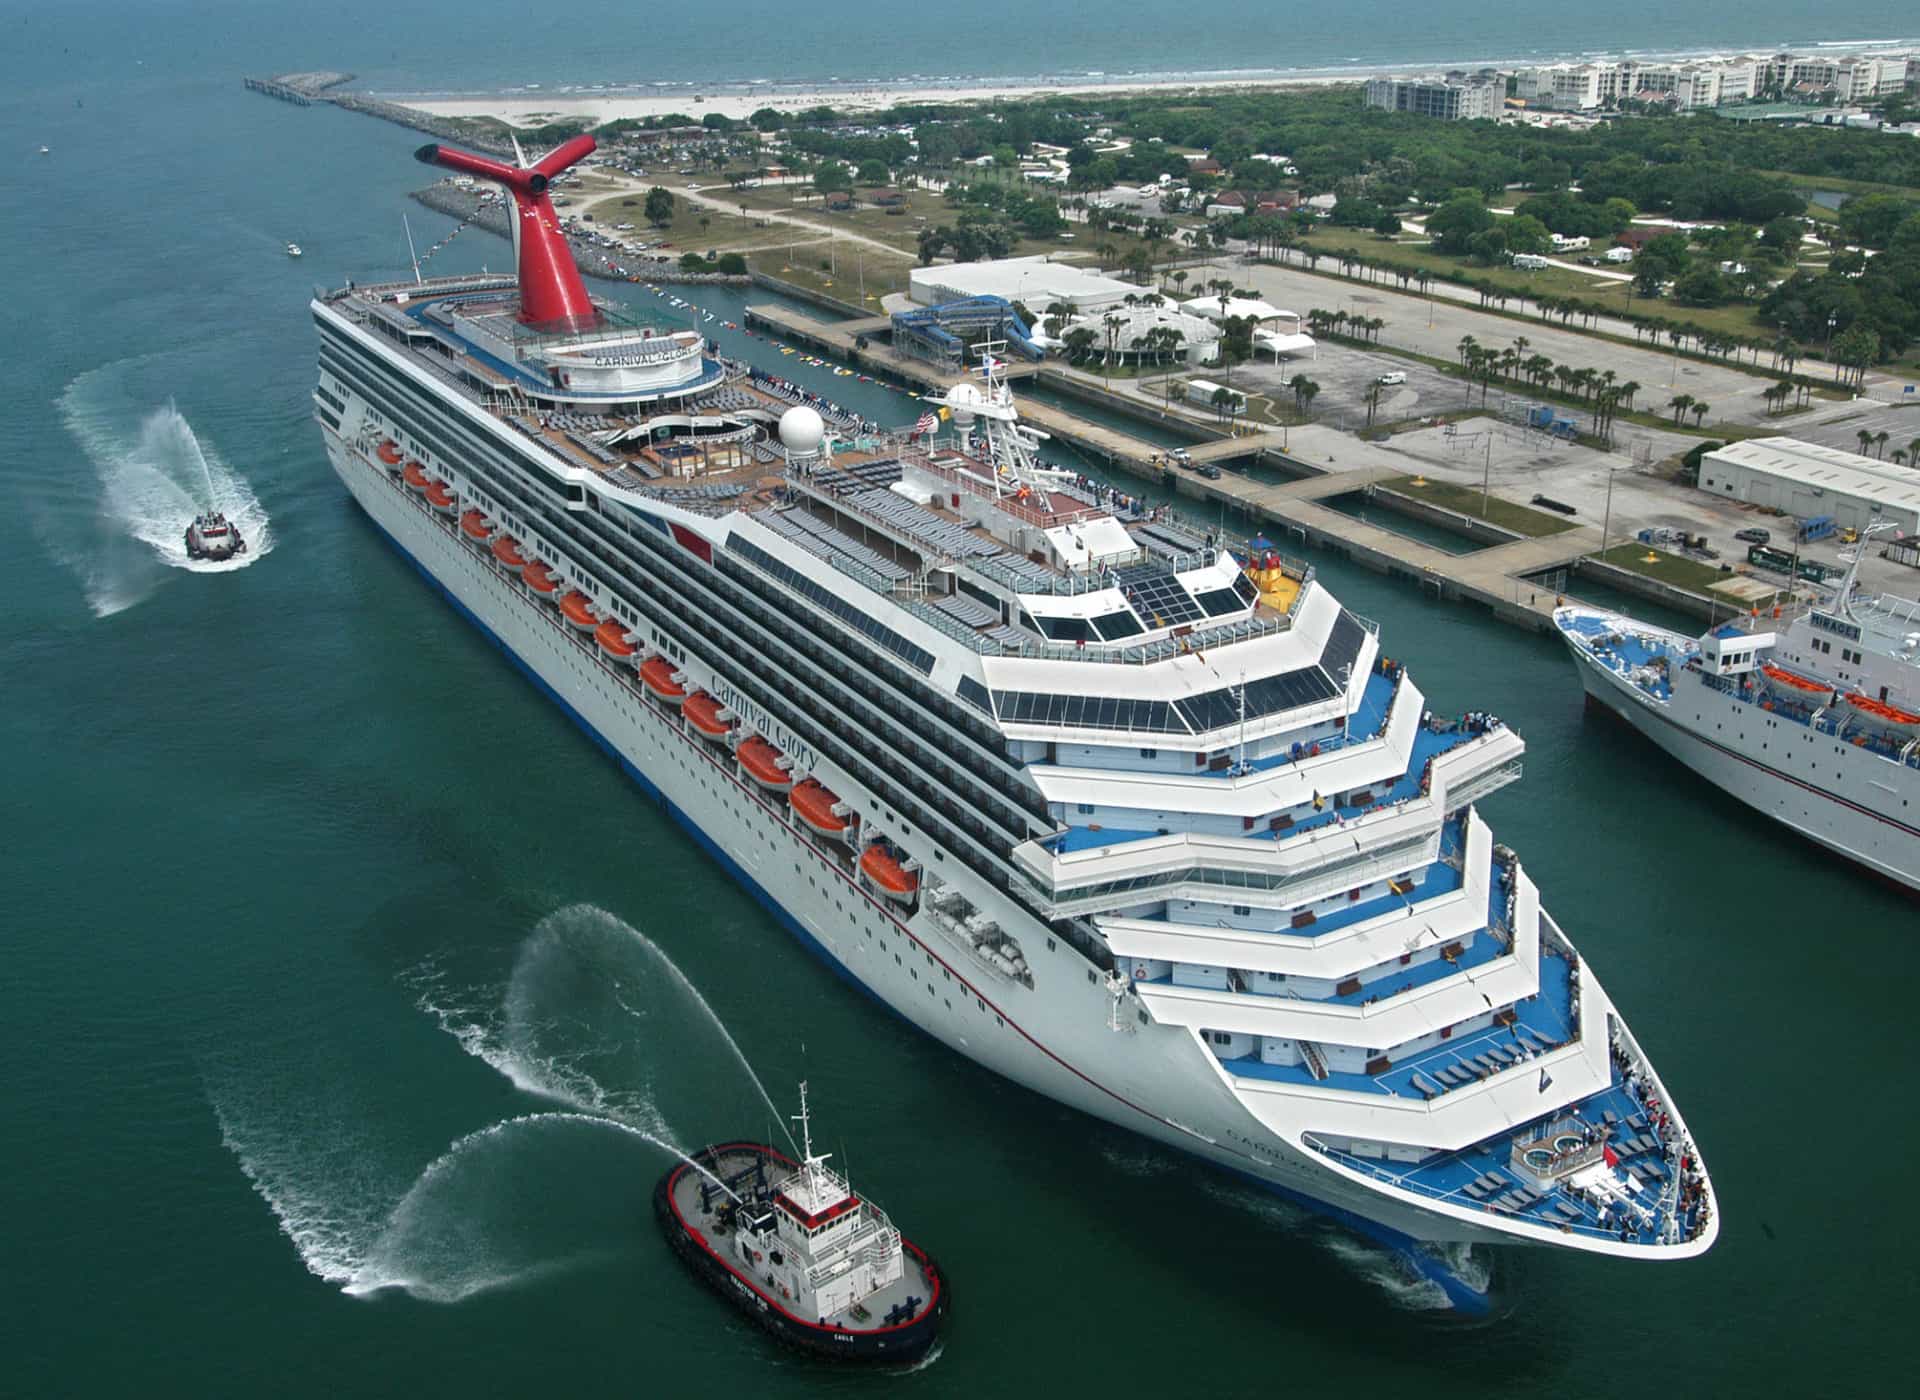 <p>Annette Mizener was with her parents, daughter, and husband on the final day of her nine-day Mexican Riviera trip aboard Carnival Cruise's The Pride when she disappeared on December 4, 2004.</p>